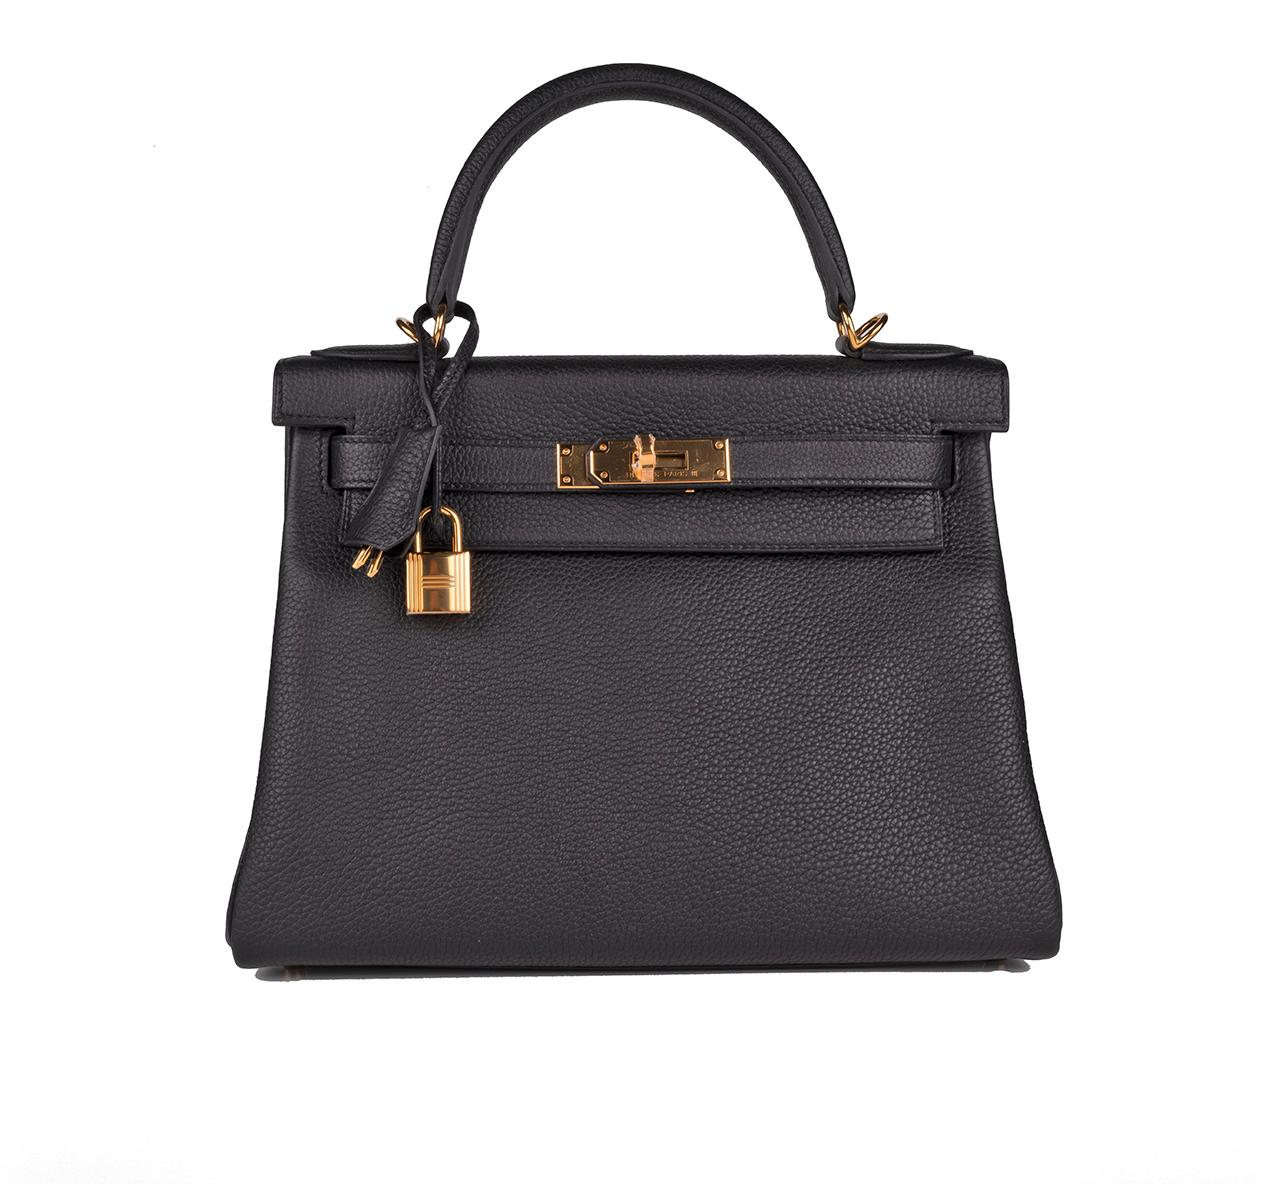 Hermes 28cm Kelly
Black Togo Leather
Togo is great for everyday use, as it is one of the most durable leathers, scratch resistant
Gold Hardware
Retourne style
Black with gold is Timeless!
Shoulder strap is great for hands free shopping
Plastic on